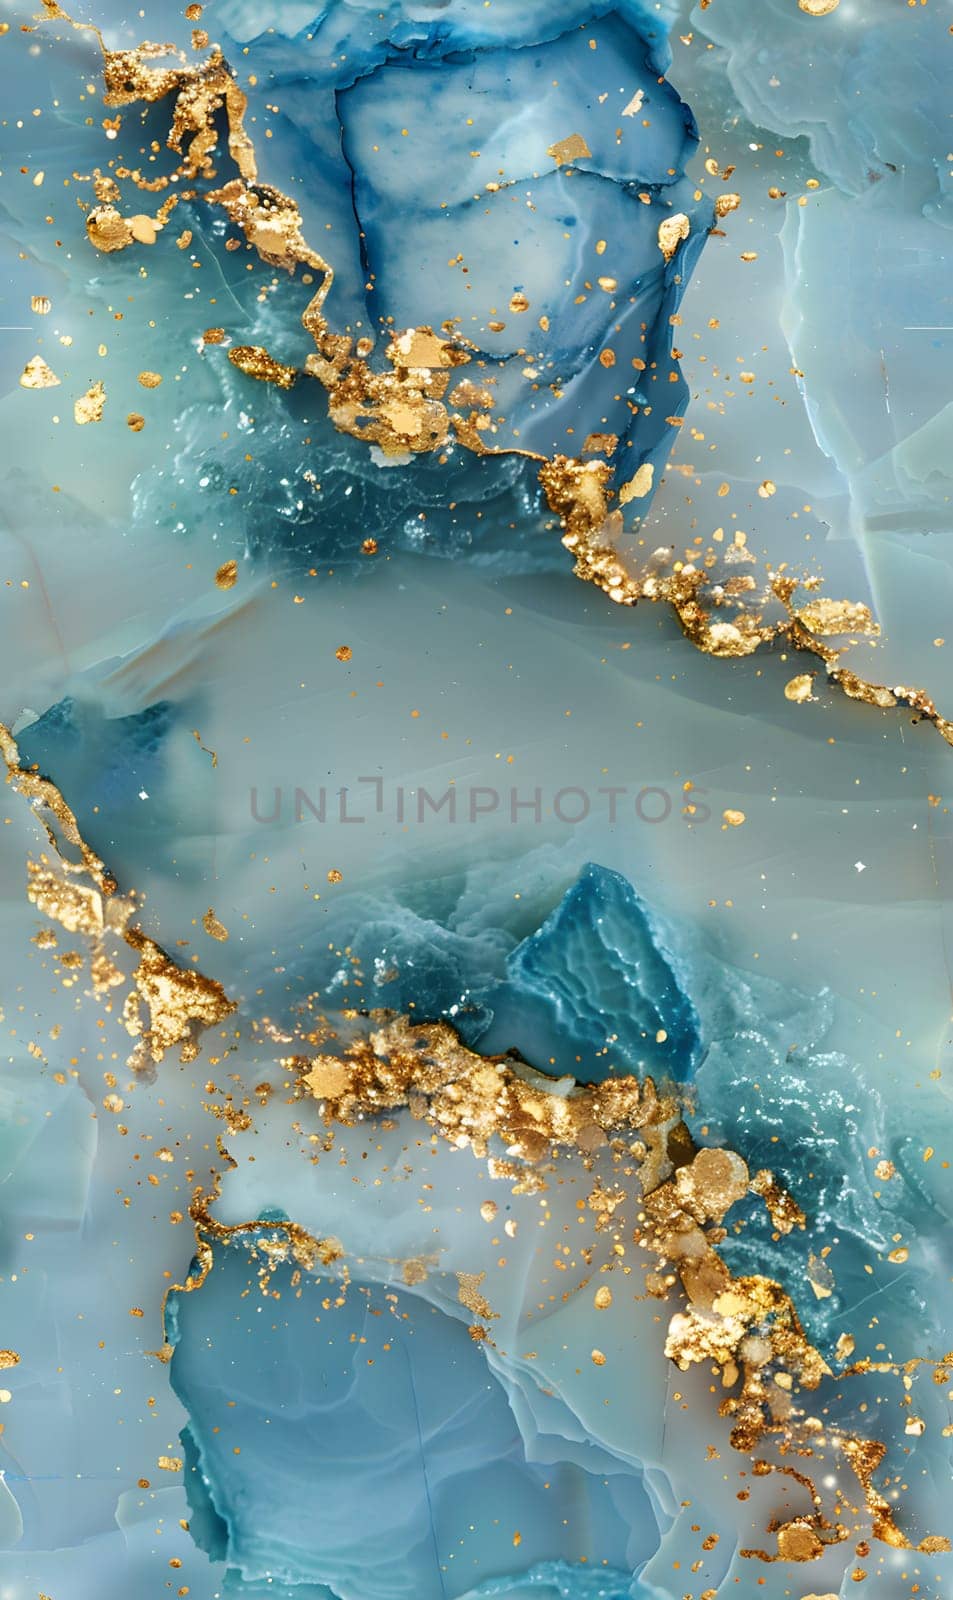 Closeup view of a mesmerizing blue and gold marble texture resembling a fluid water pattern, reminiscent of underwater landscapes and aquatic organisms